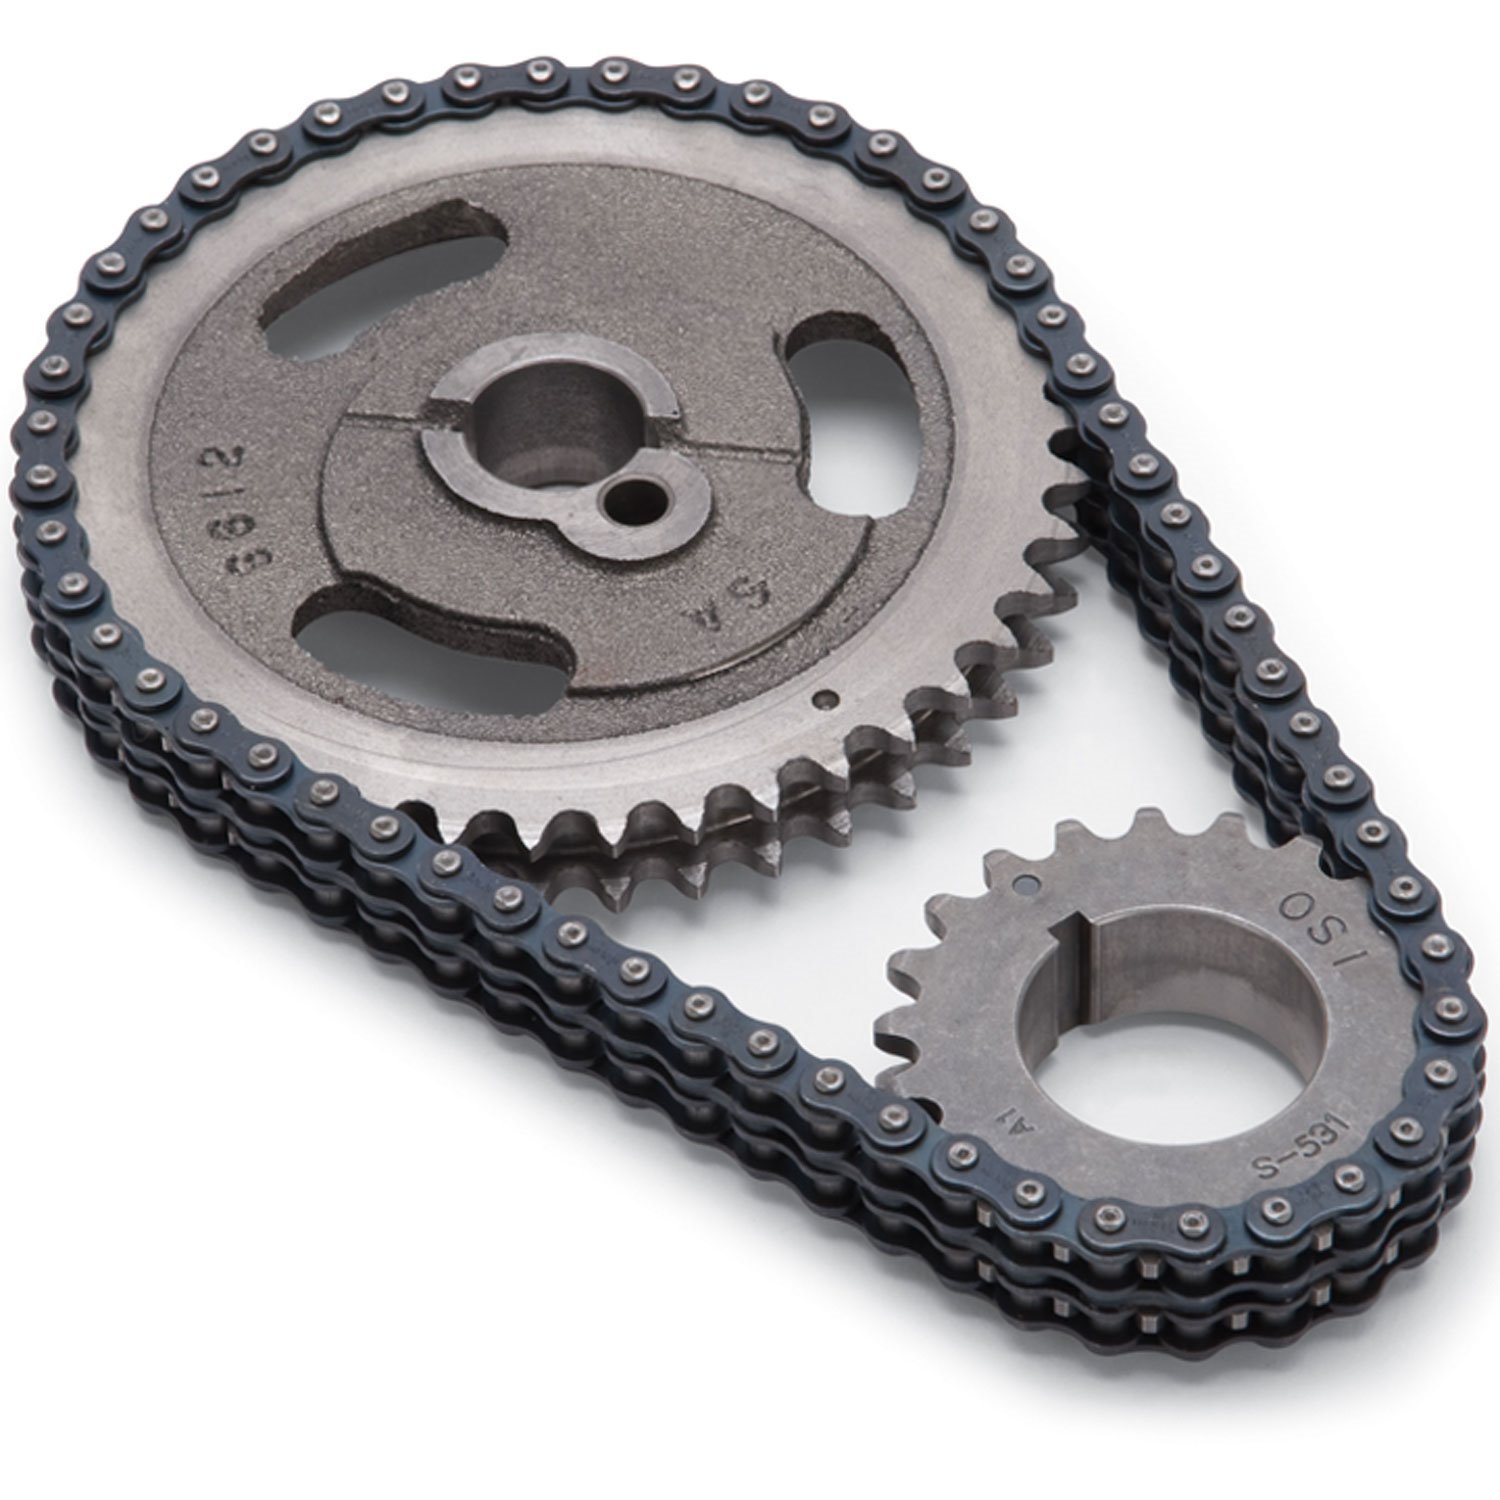 Stock Replacement Performer-Link Timing Chain Set for 1984-1995